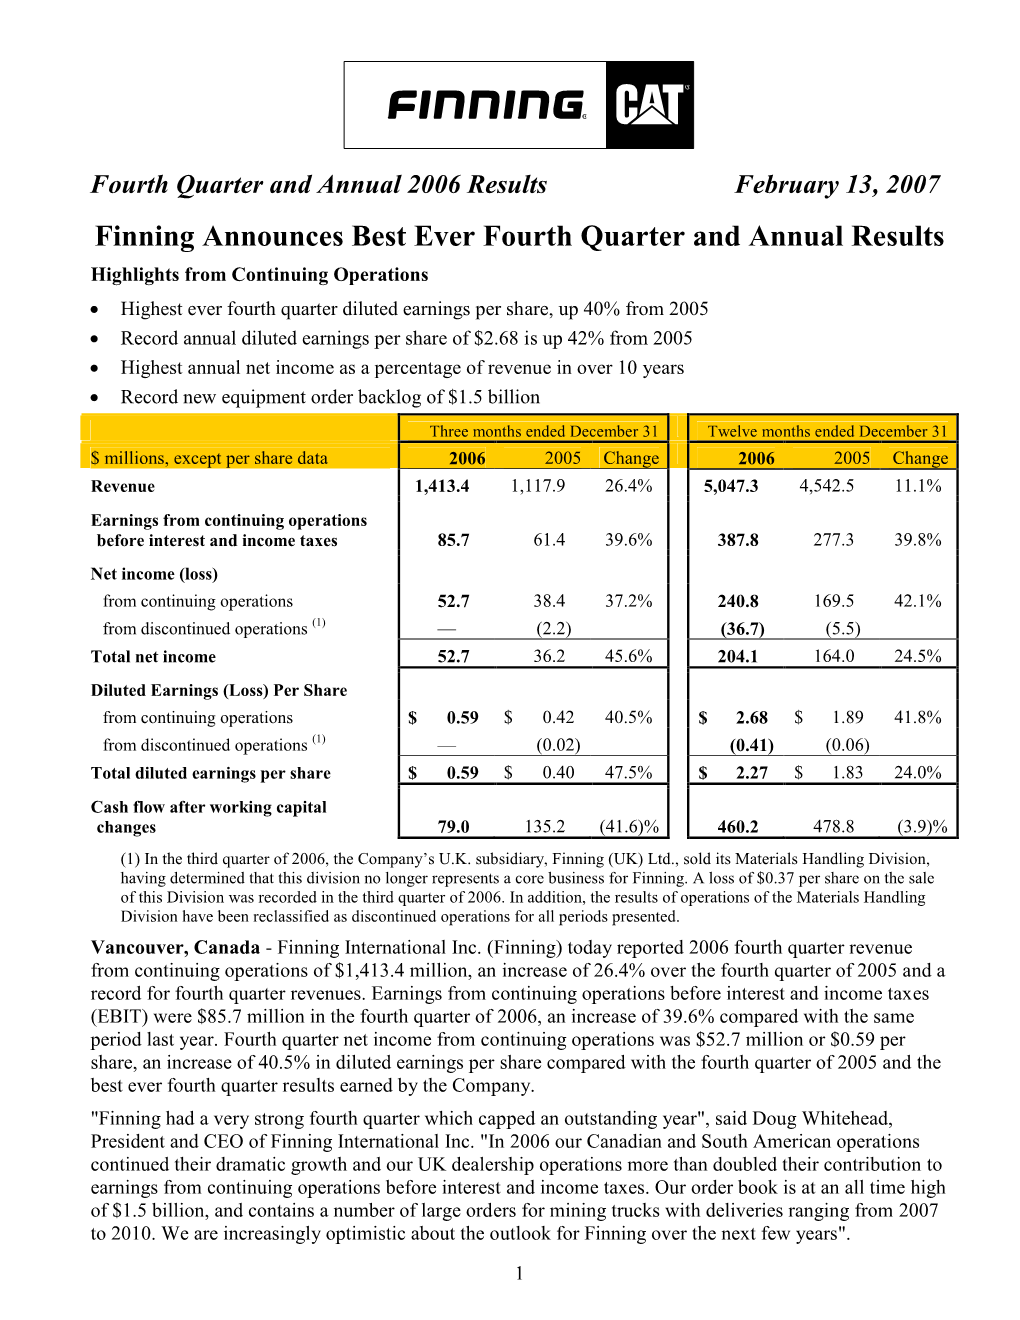 Finning Announces Best Ever Fourth Quarter and Annual Results